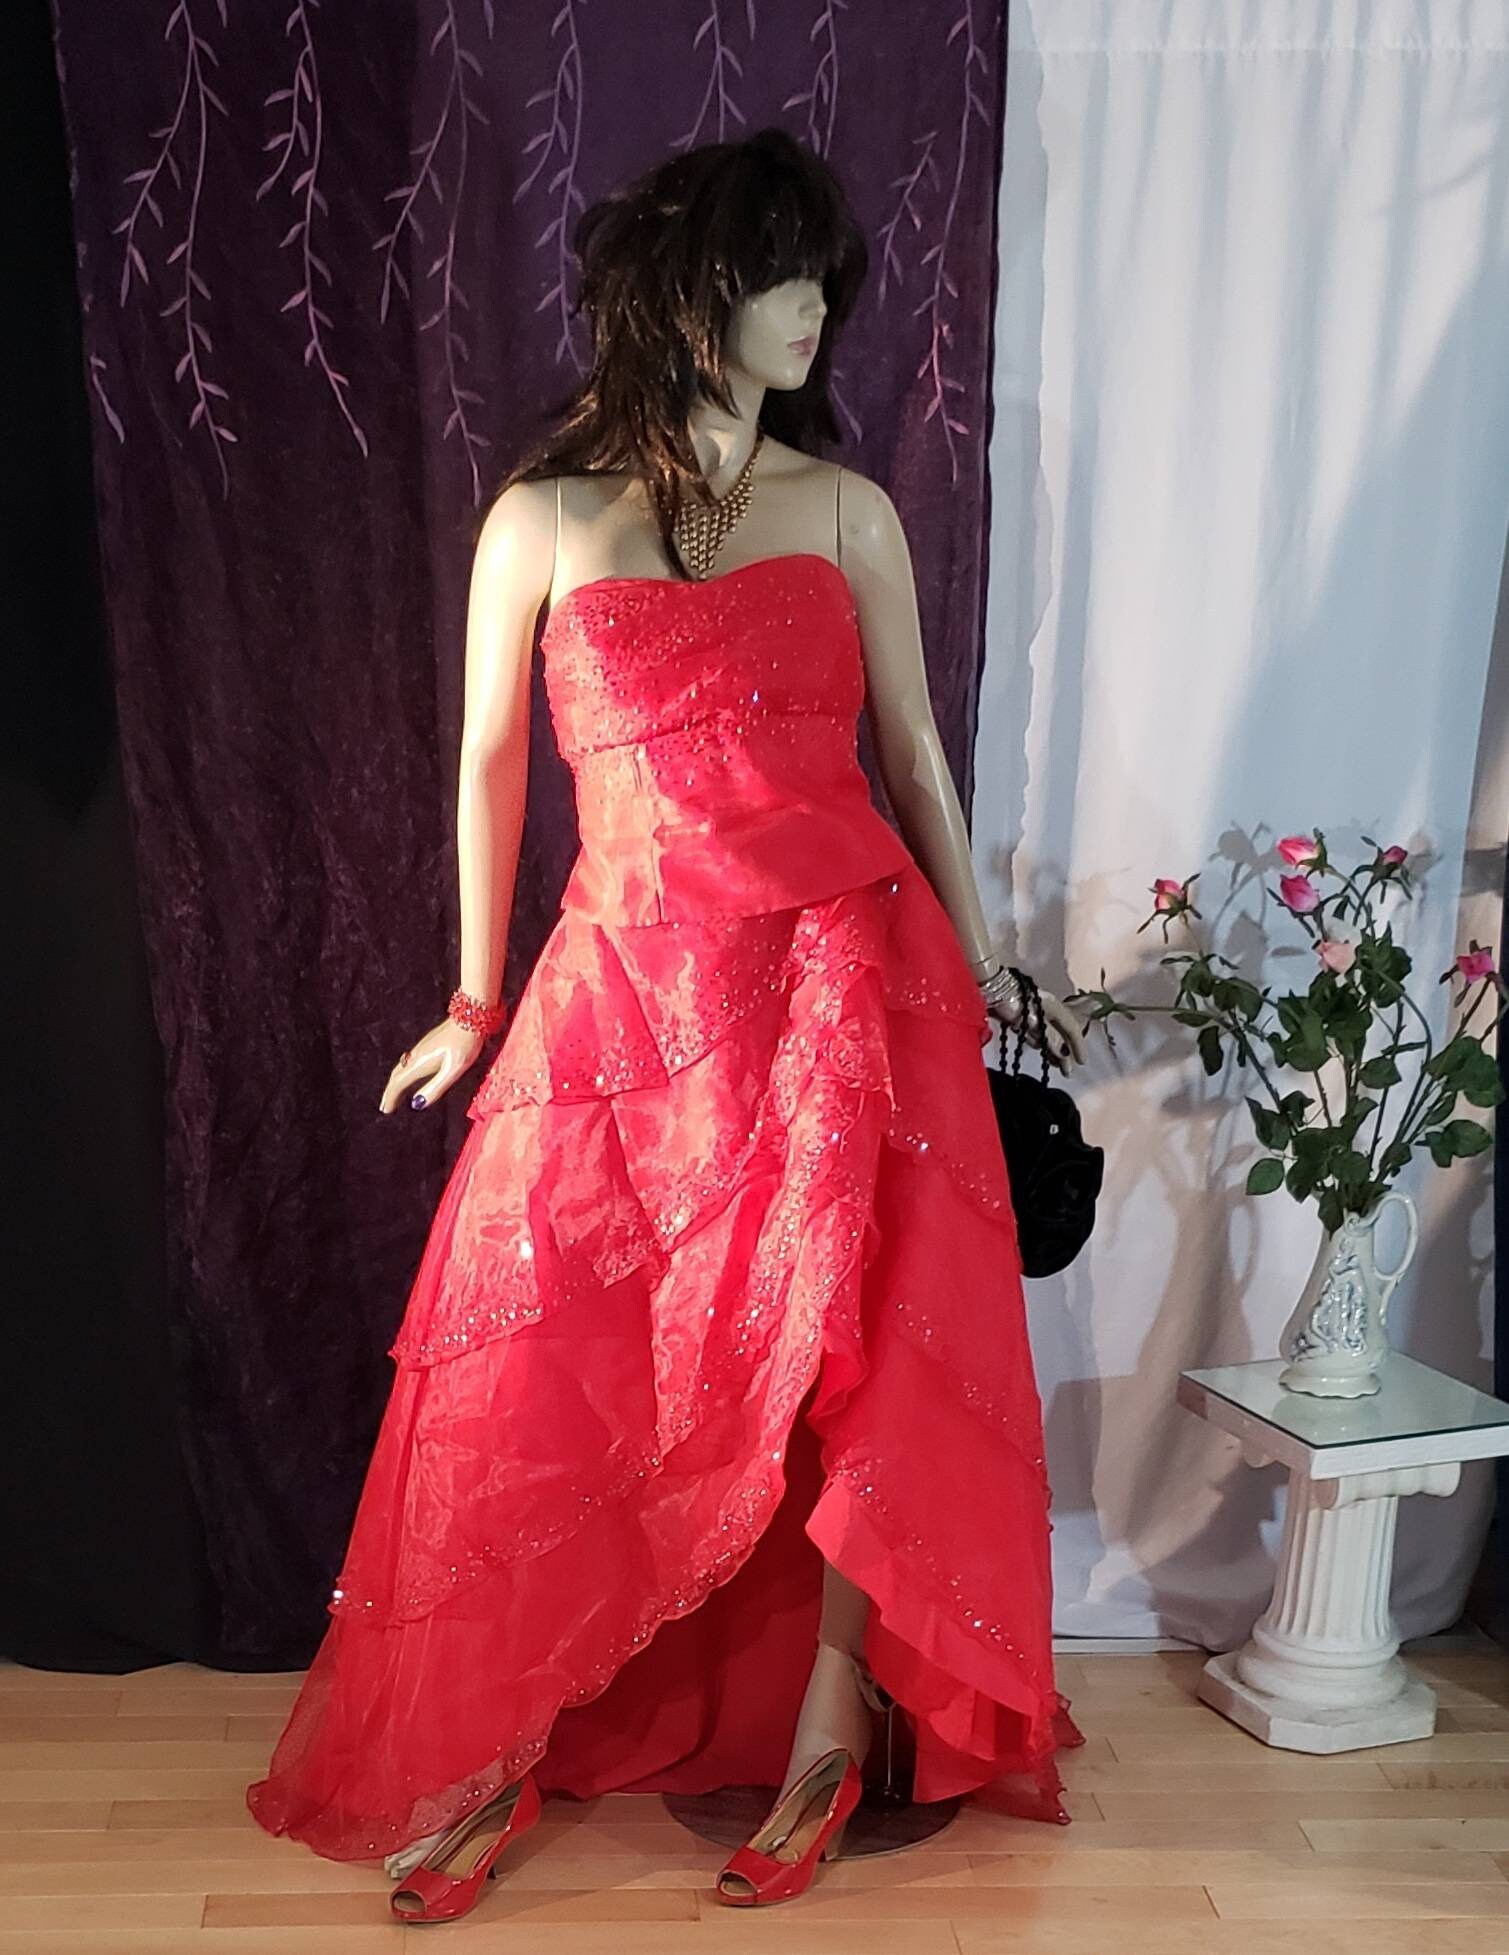 Red Strapless Ball Gown Size XL Prom Dress Gothic Wedding - Etsy France